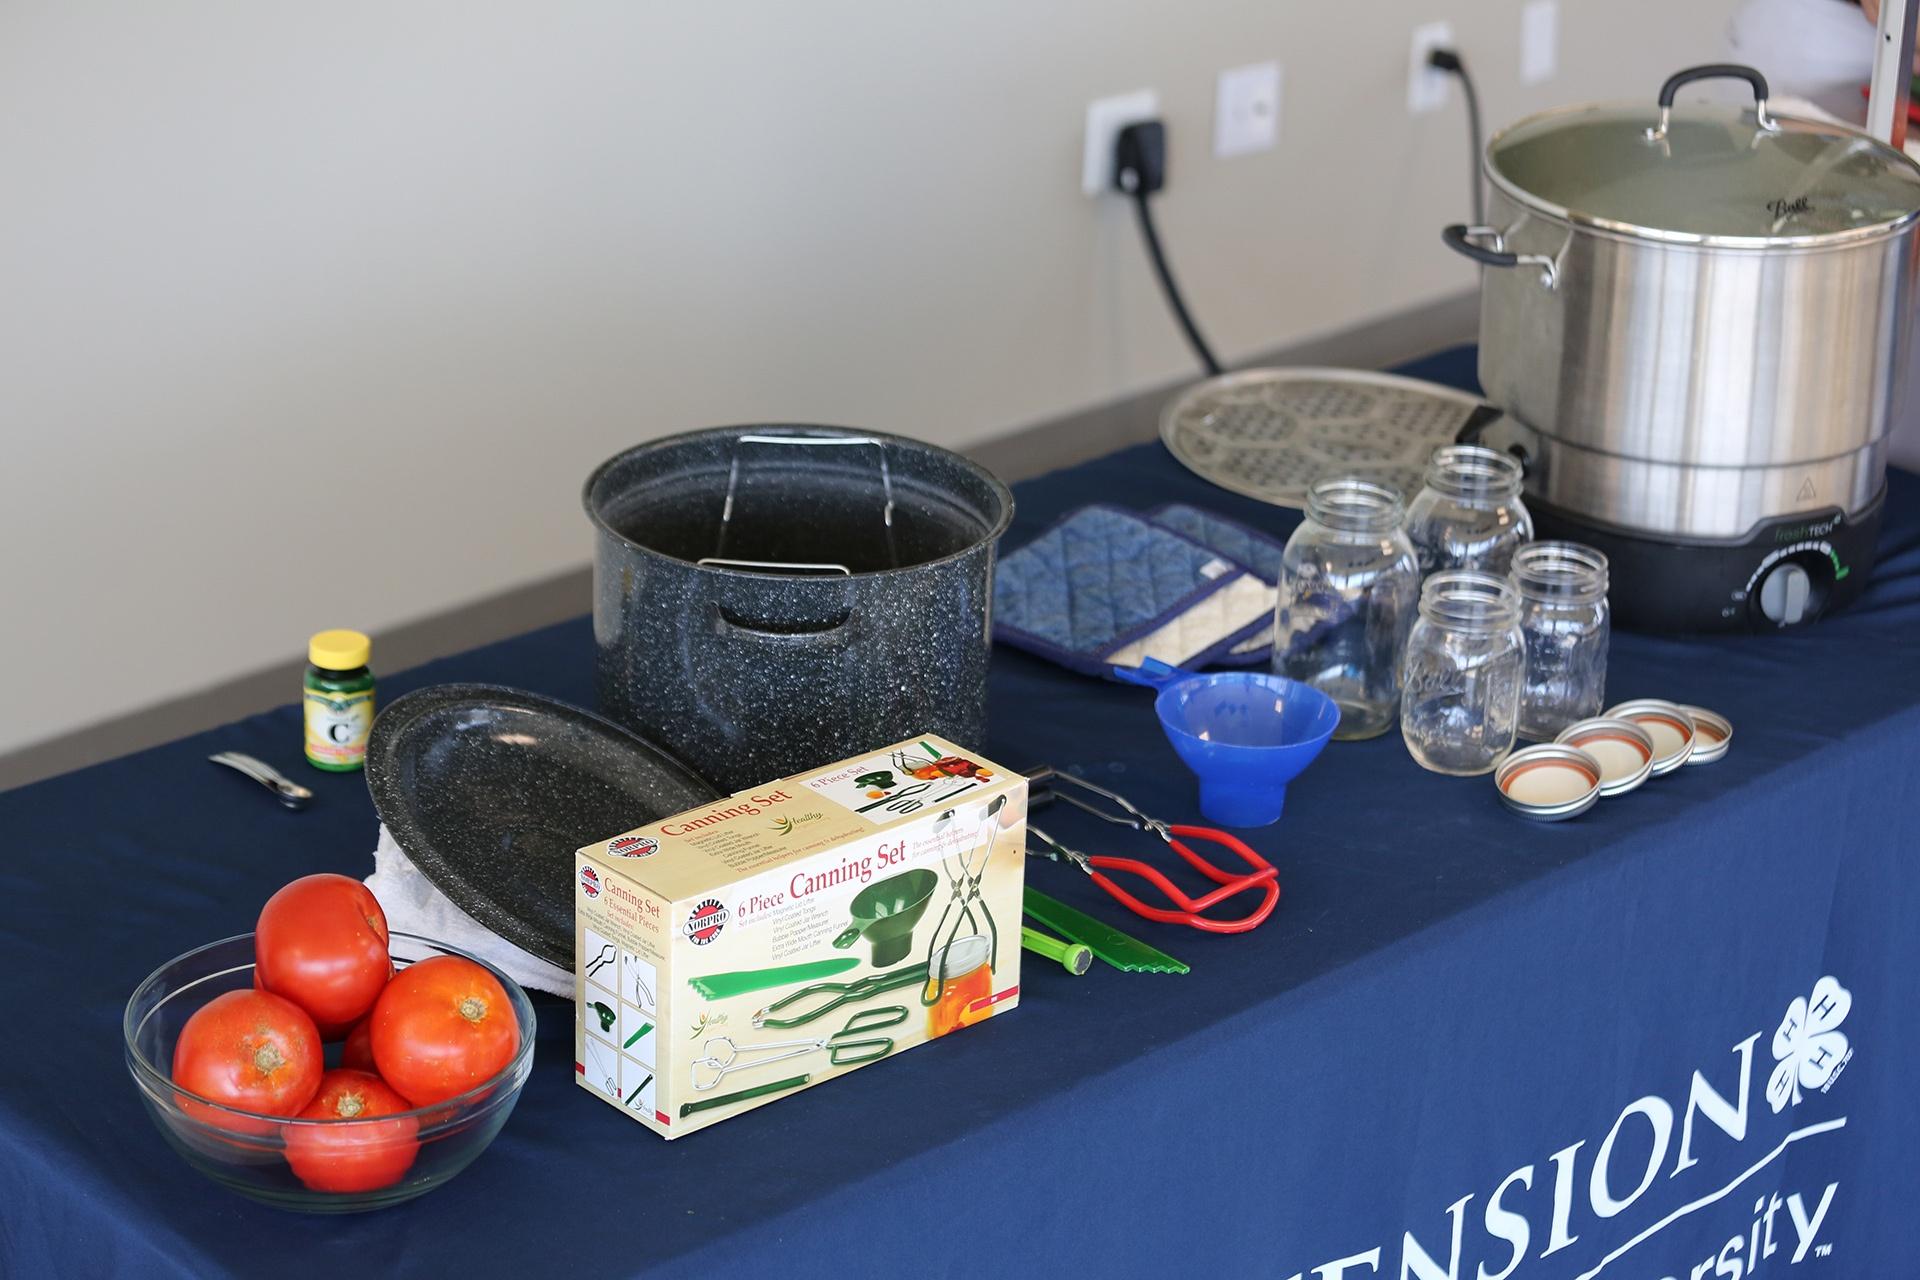 Photo of suggested equipment needed for canning tomatoes.